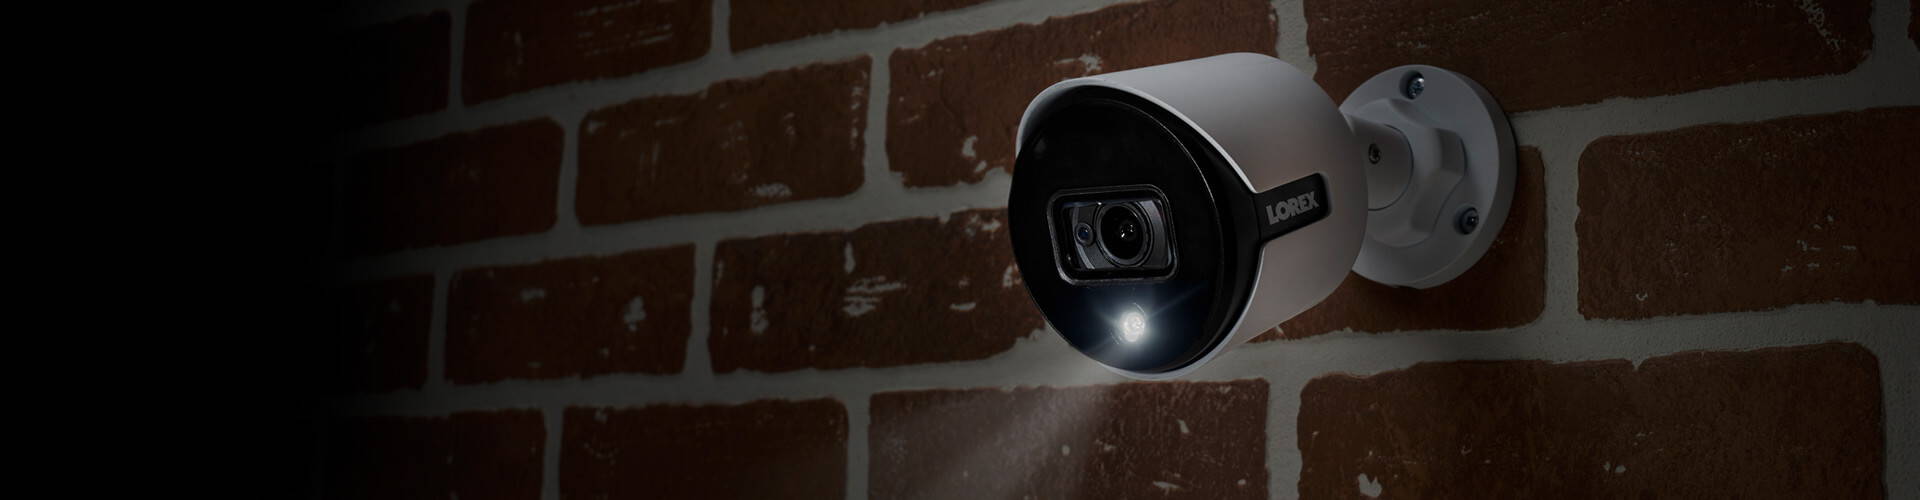 active deterrence security camera on brick wall banner